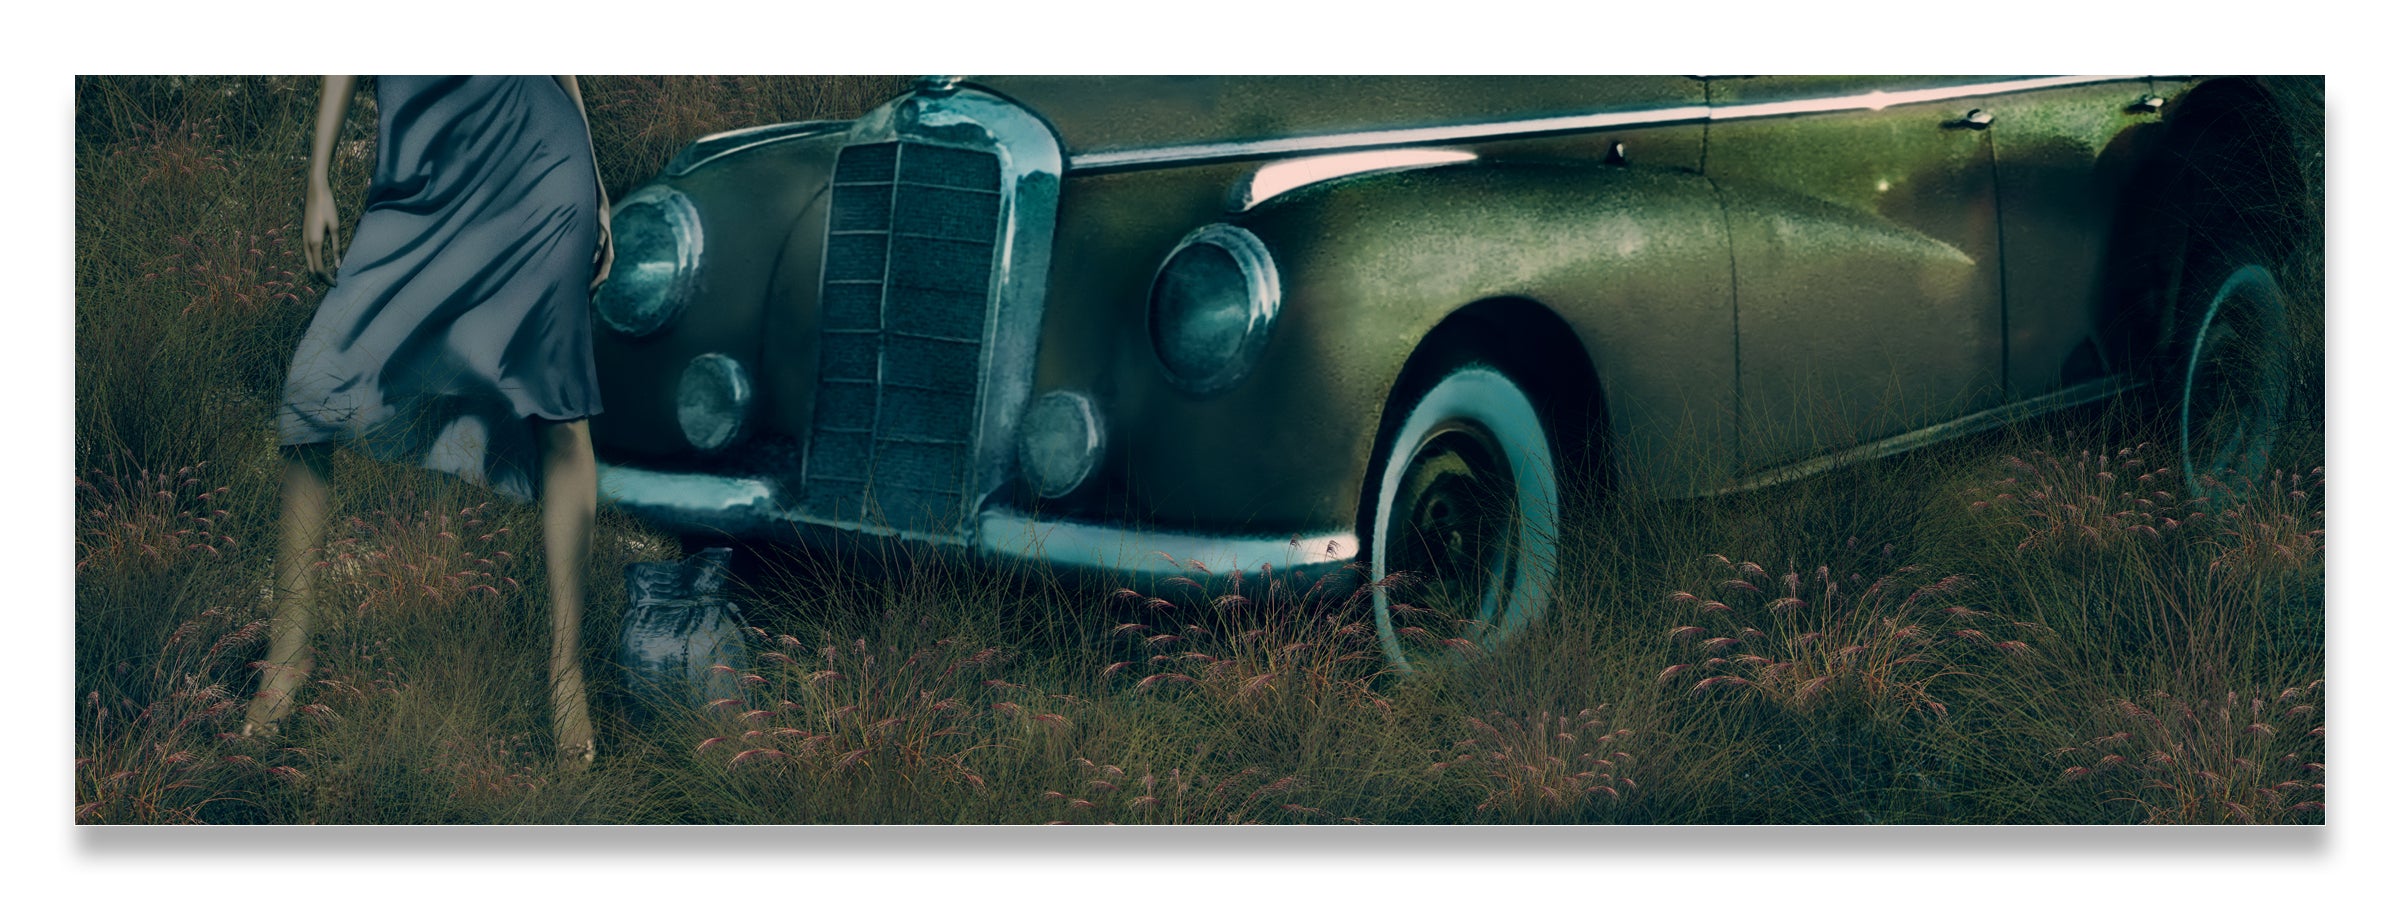 Woman Standing in Front of a Classic Car at Dusk-Muted Color Tones-Fine Art Print